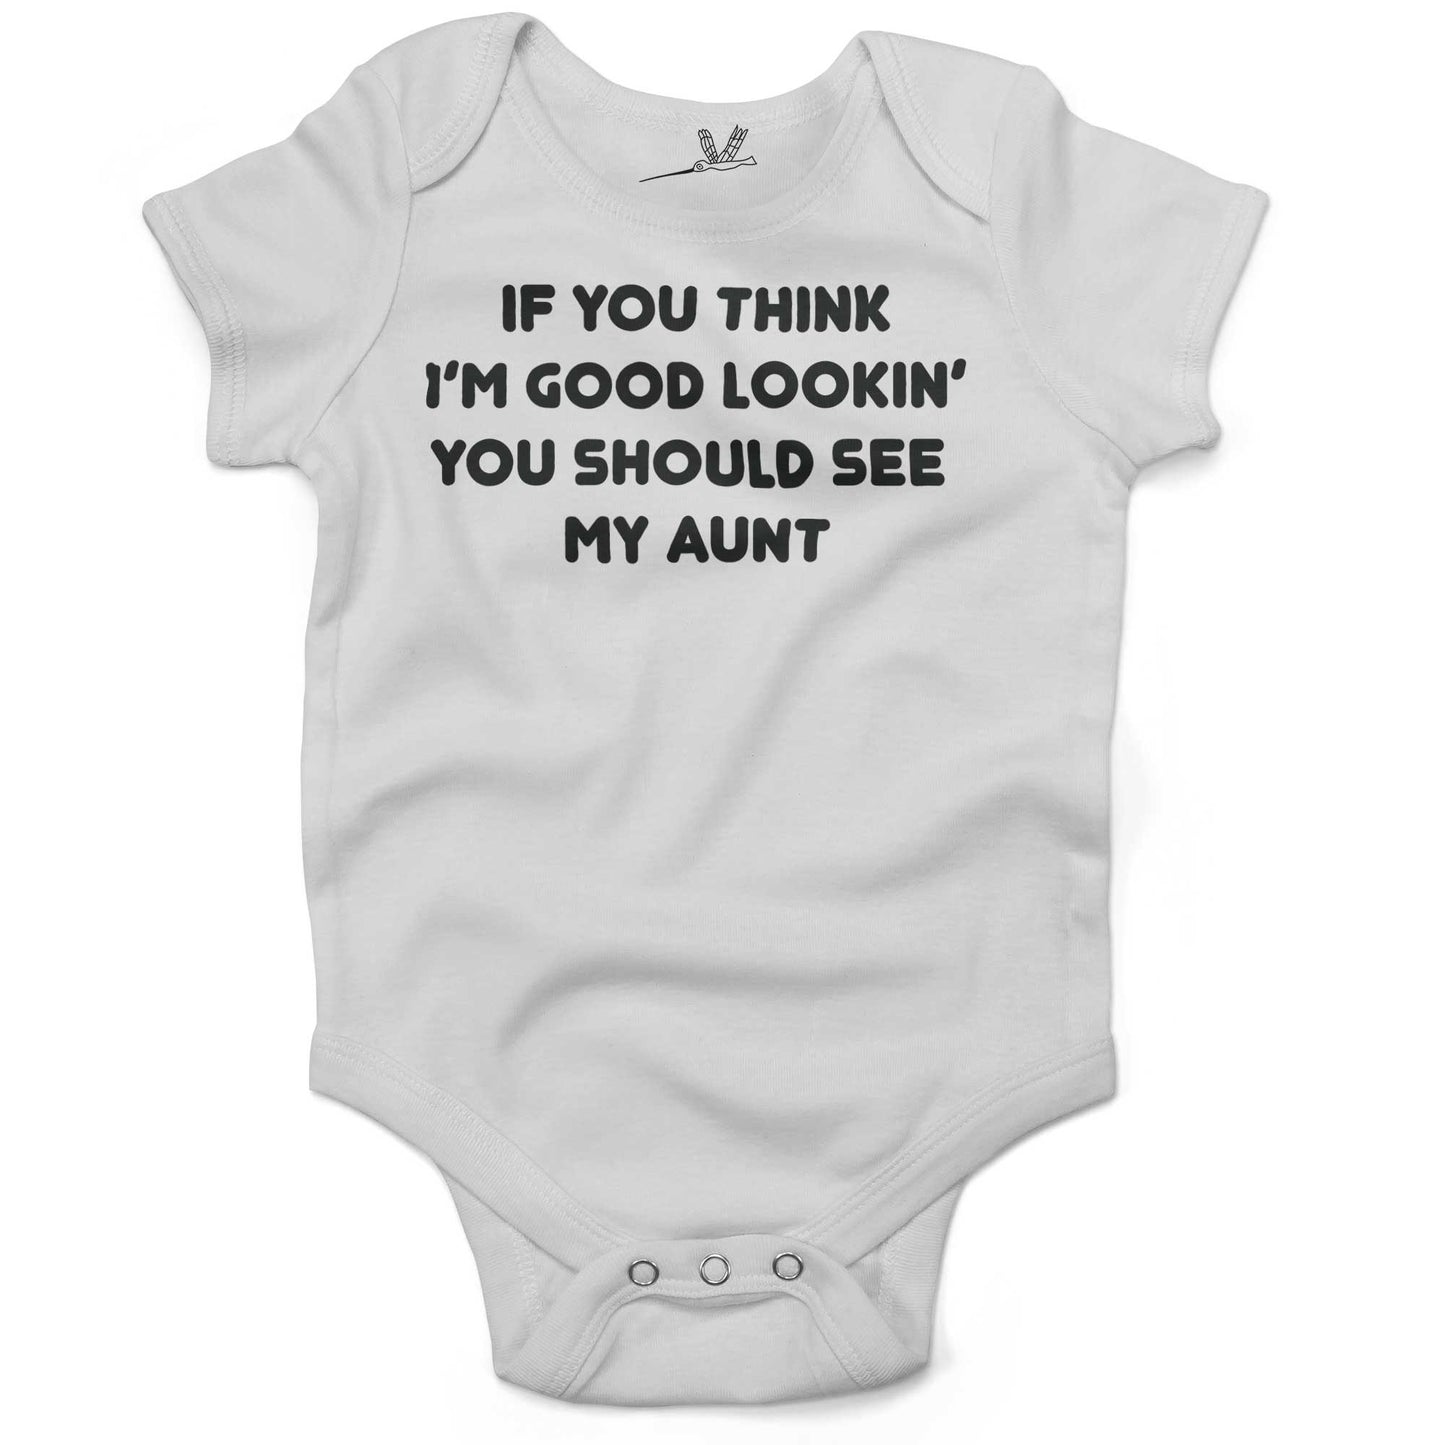 If You Think I'm Good Lookin' You Should See My Aunt Infant Bodysuit or Raglan Tee-White-3-6 months